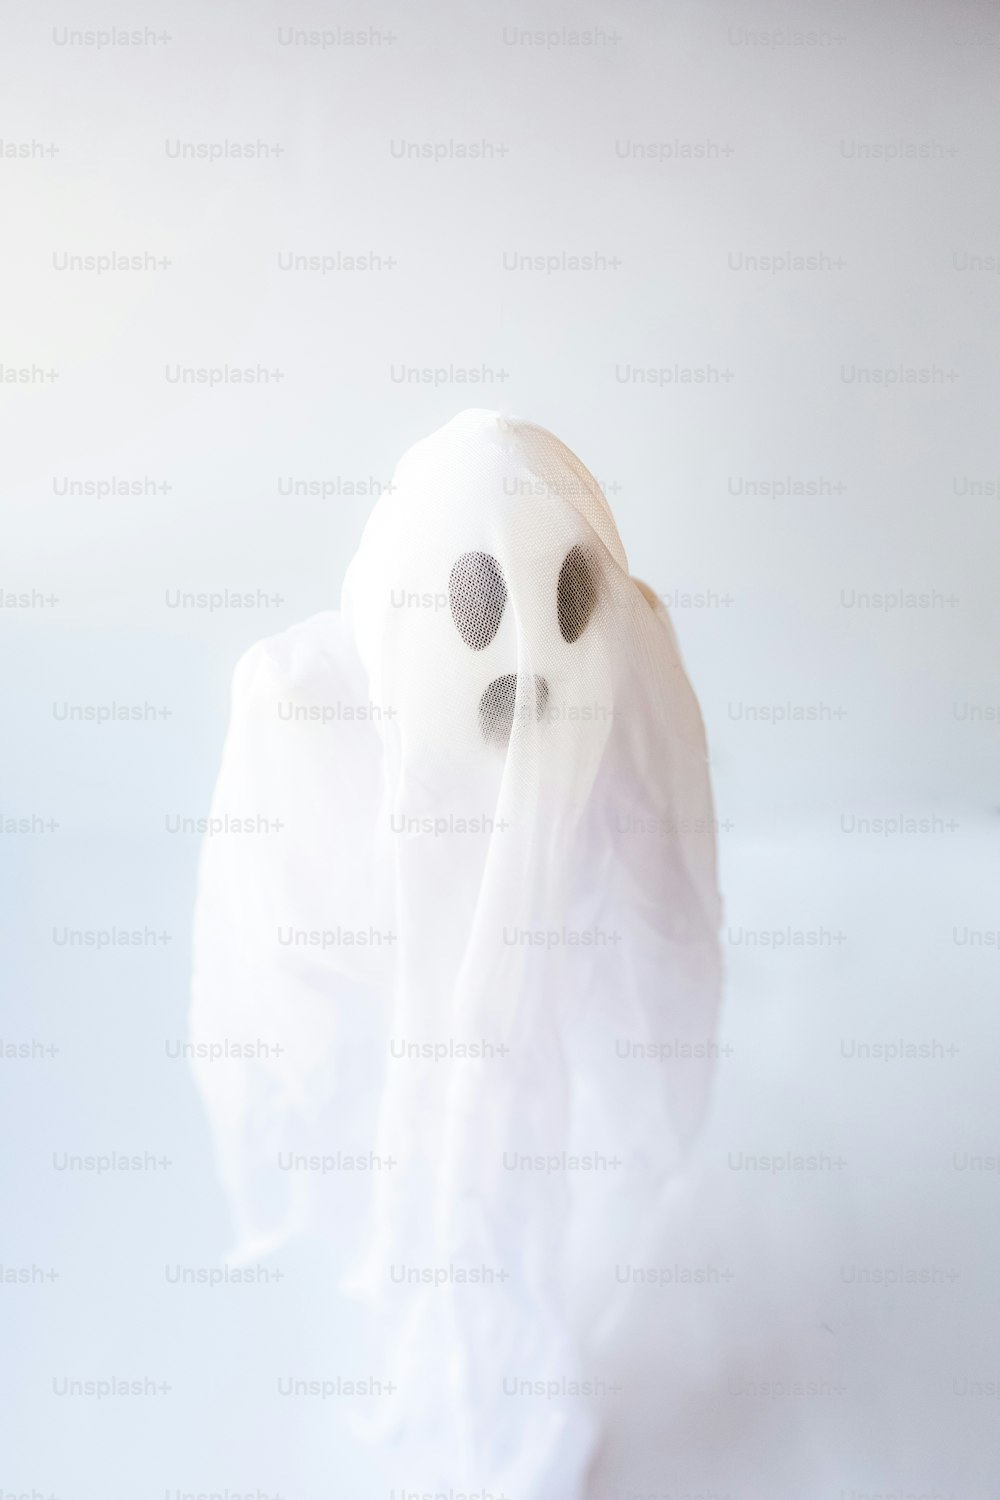 a white ghost with a black nose and eyes